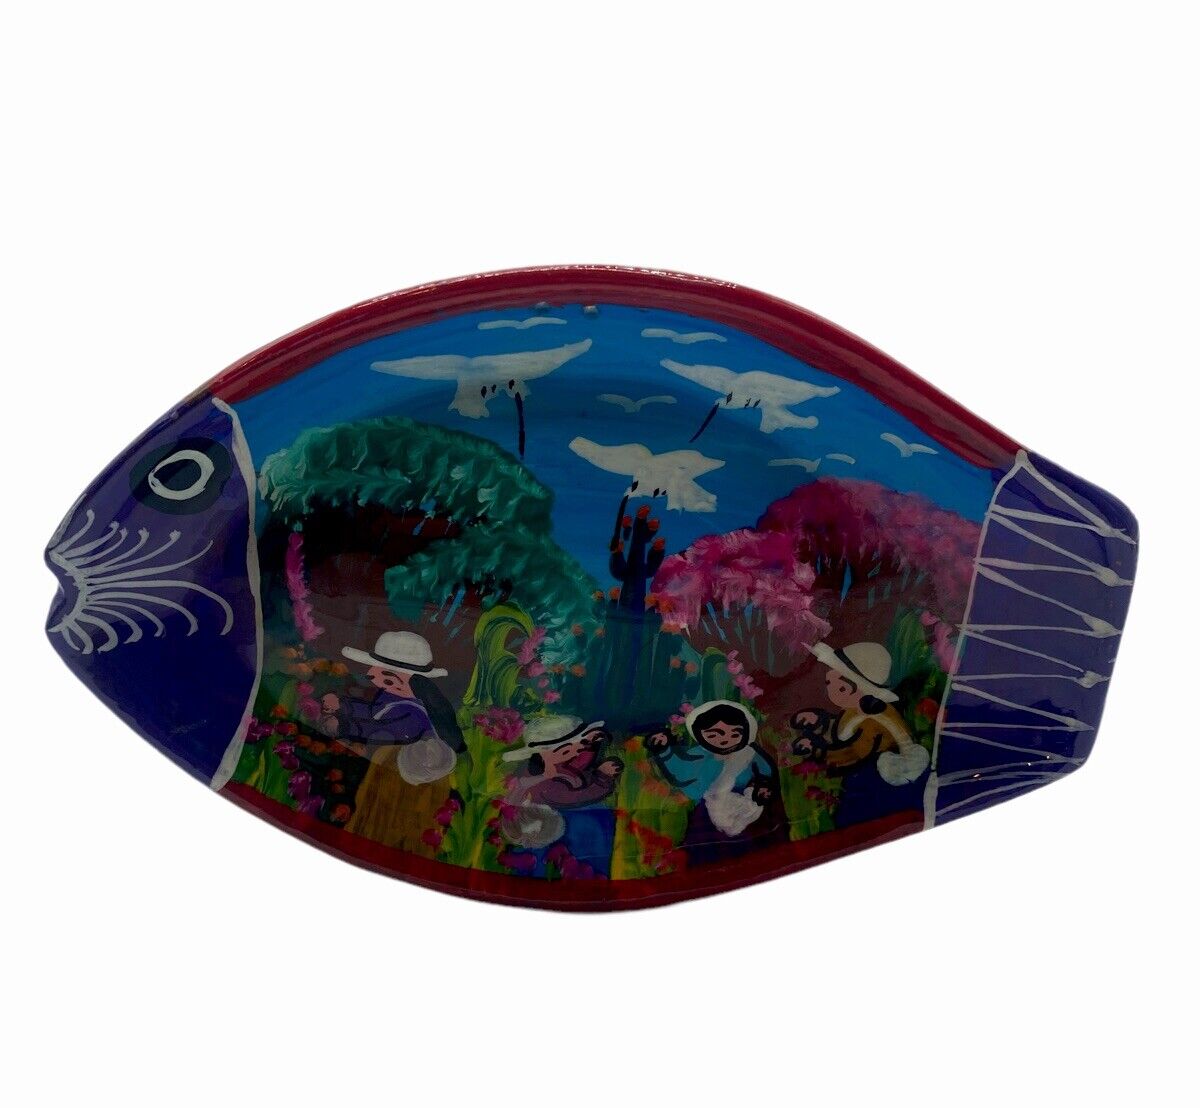 Vintage Folk Art Fish Plate Hand Painted Mexican Pottery Birds Wall Art